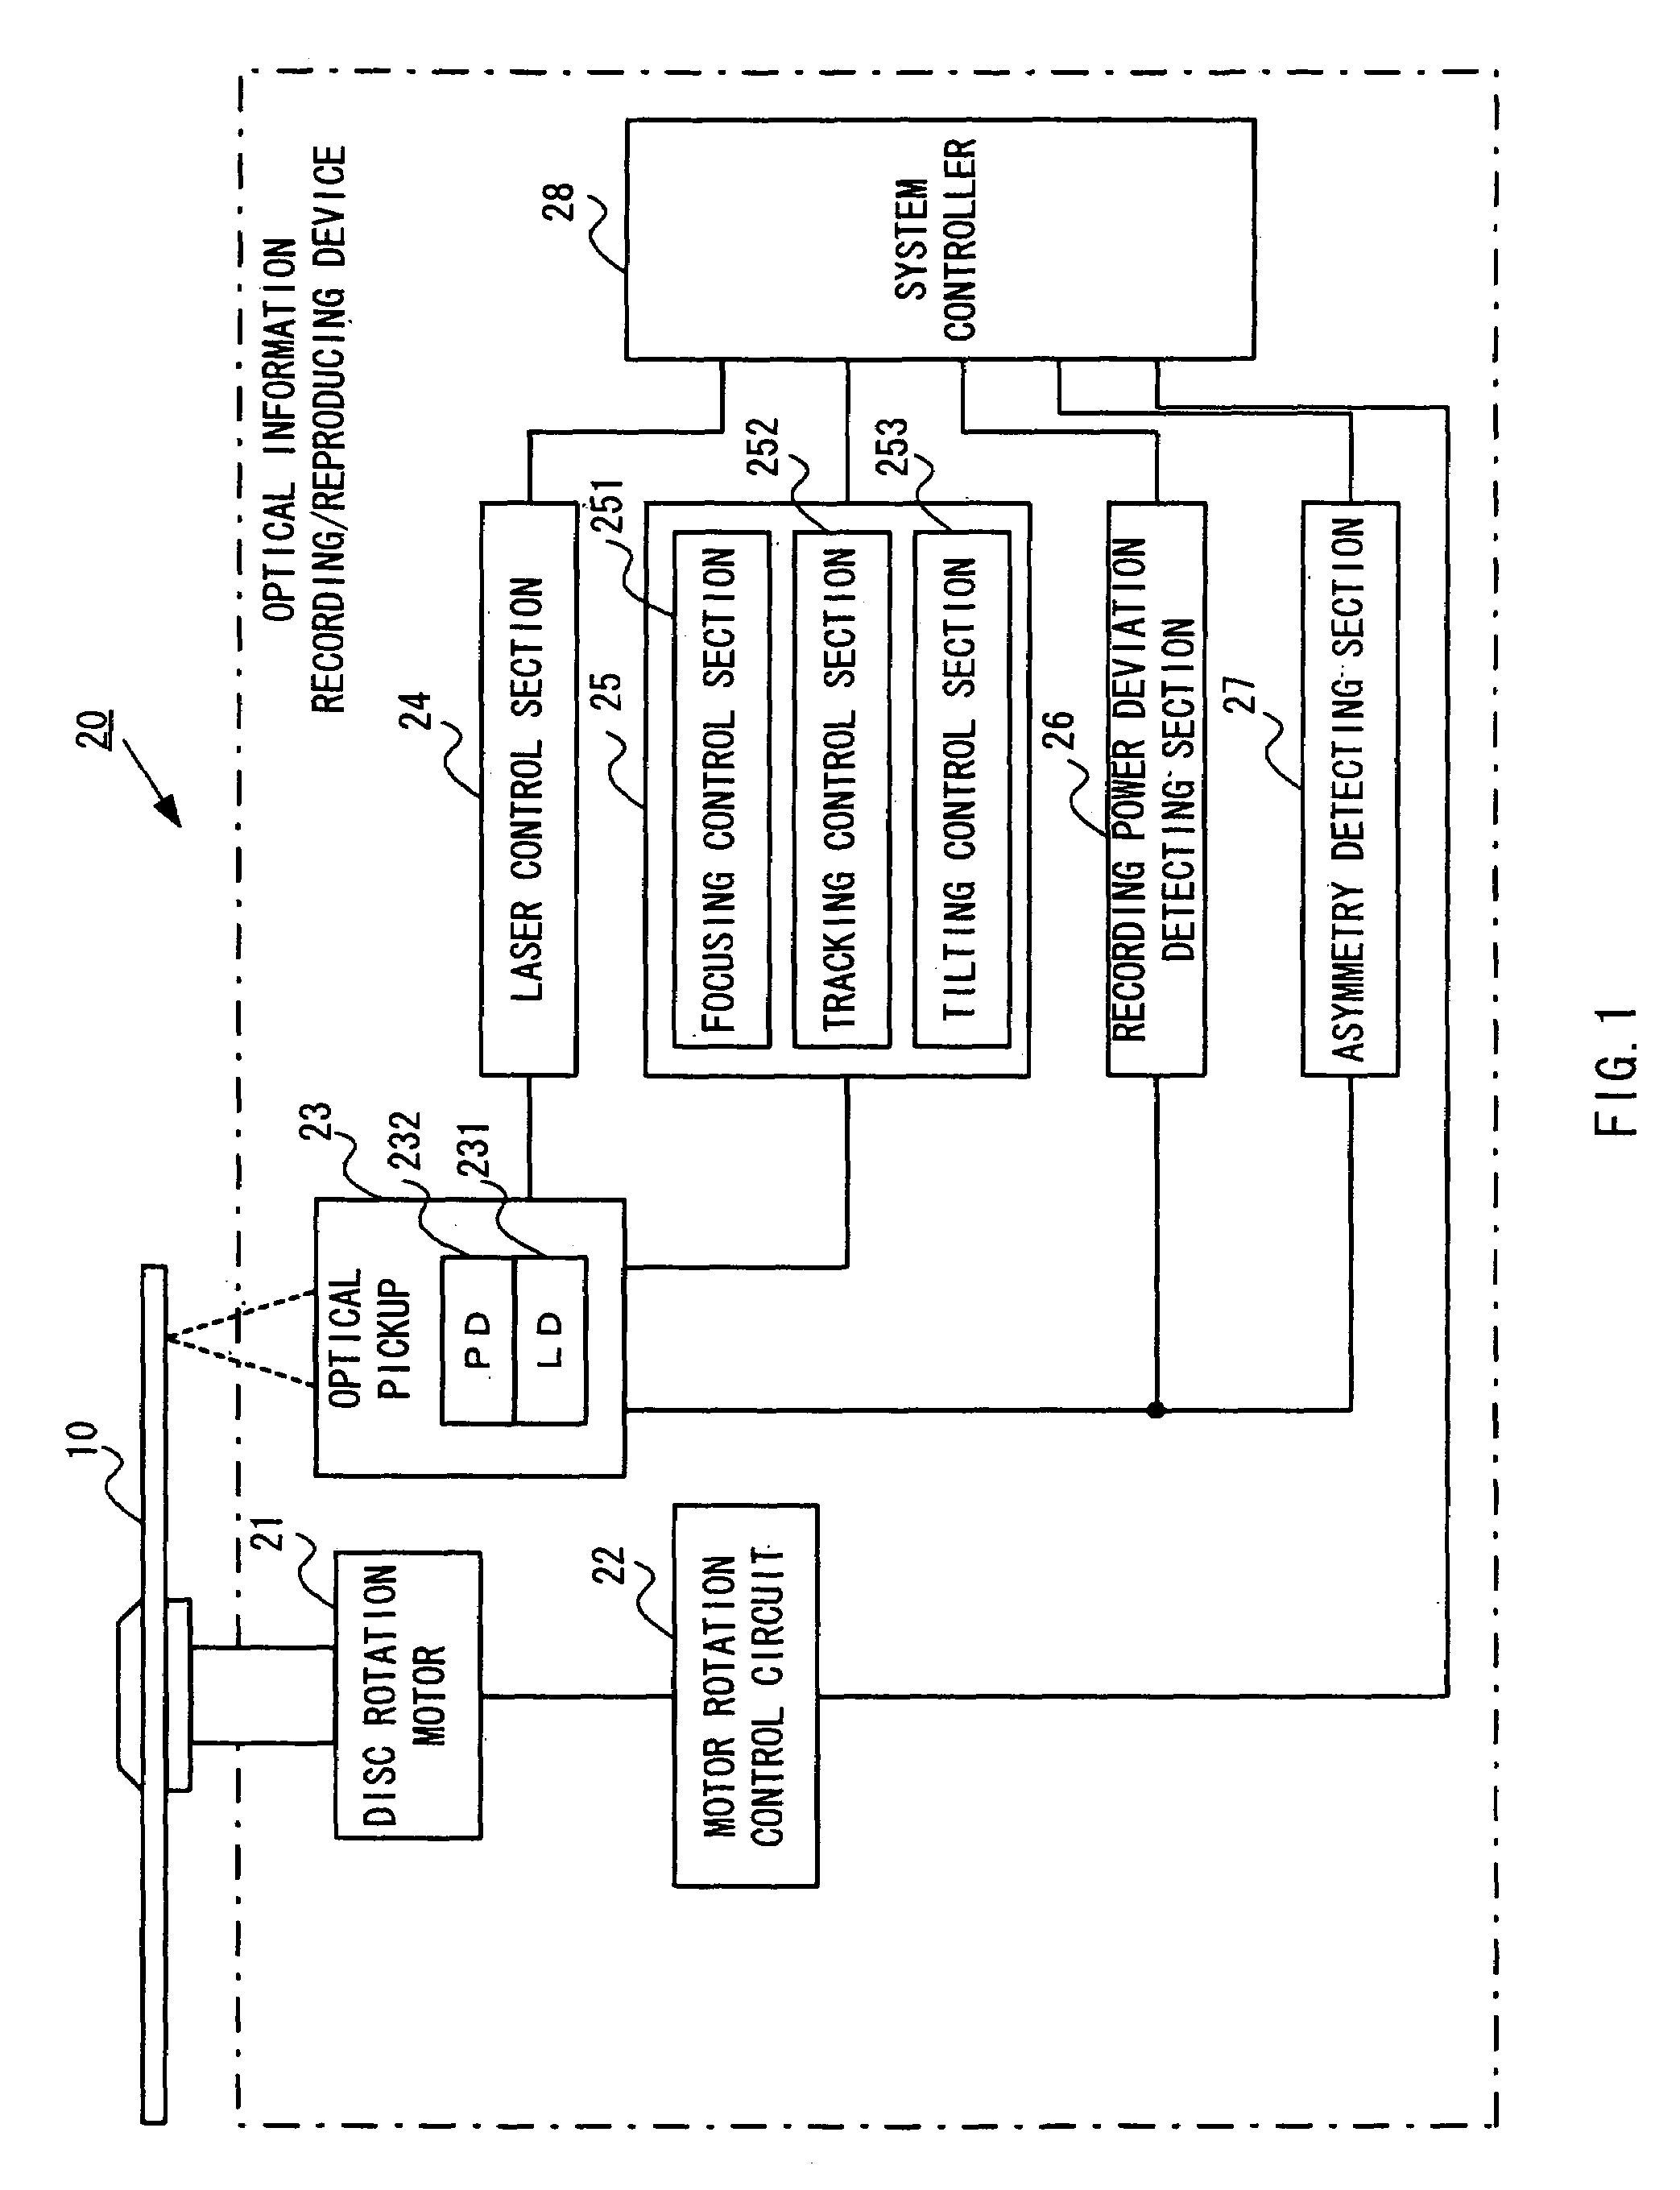 Optical information recording method and apparatus, and recorded medium where optical information recording control program is recorded